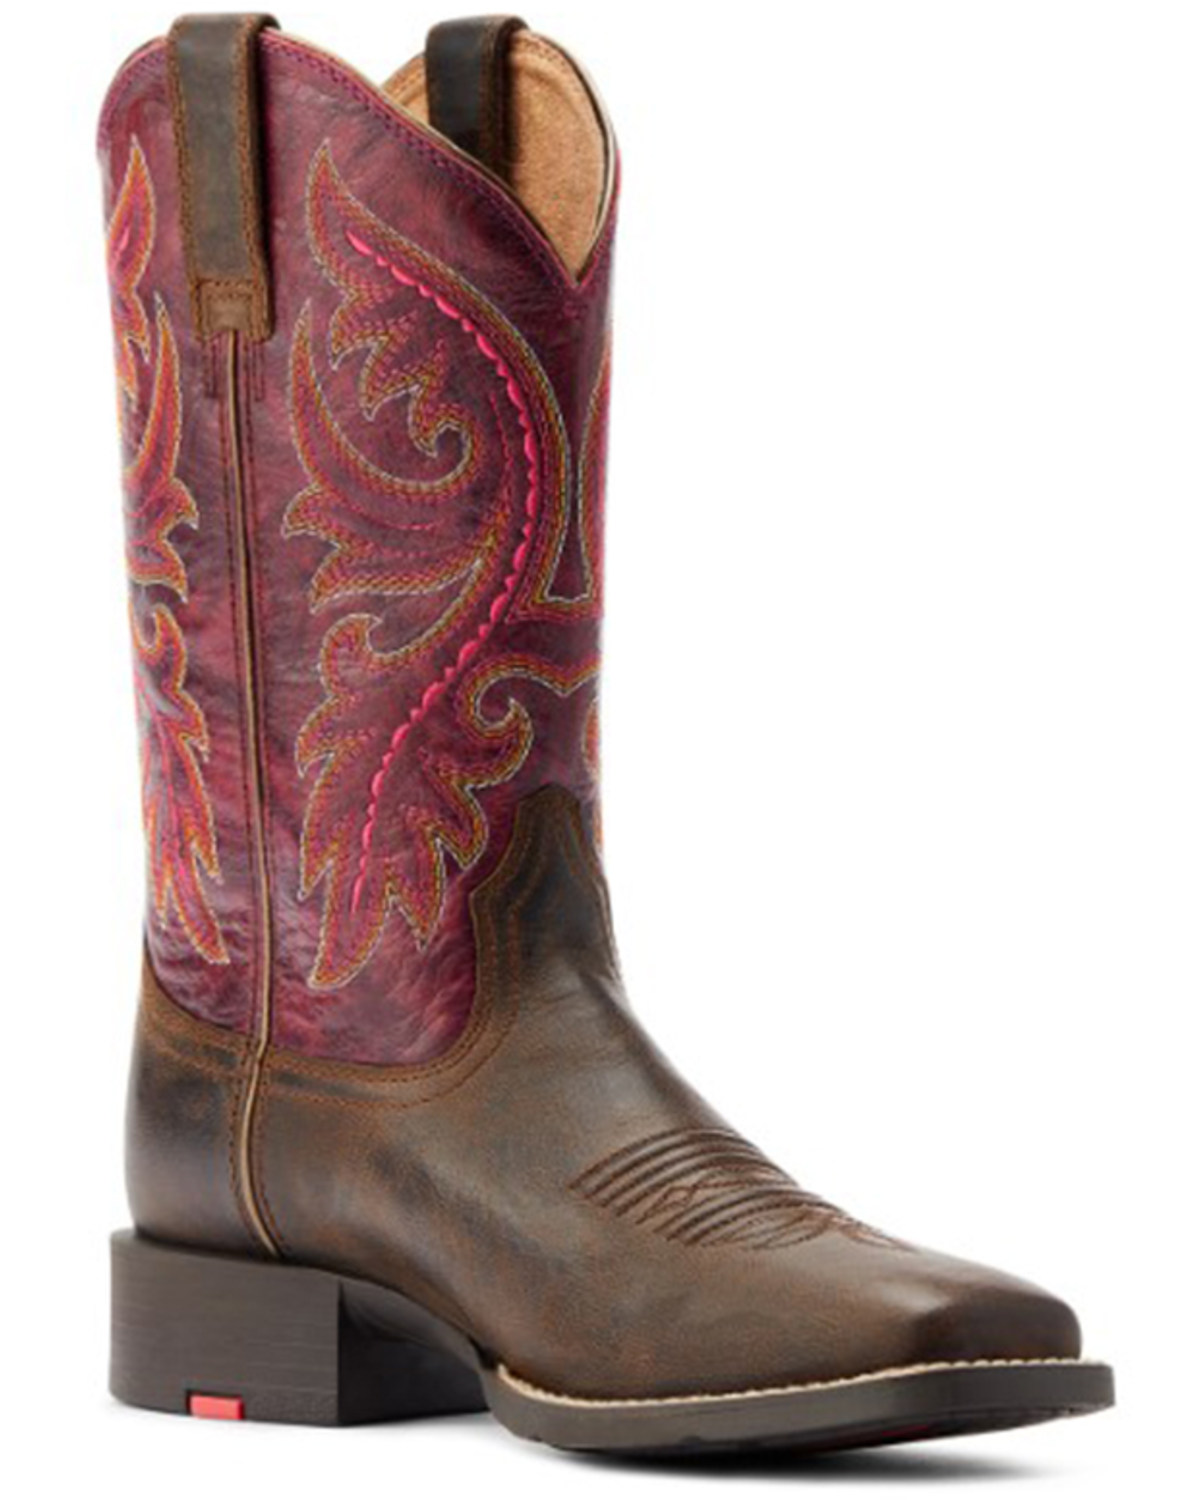 Ariat Women's Round Up Back Zip Western Performance Boots - Broad Square Toe